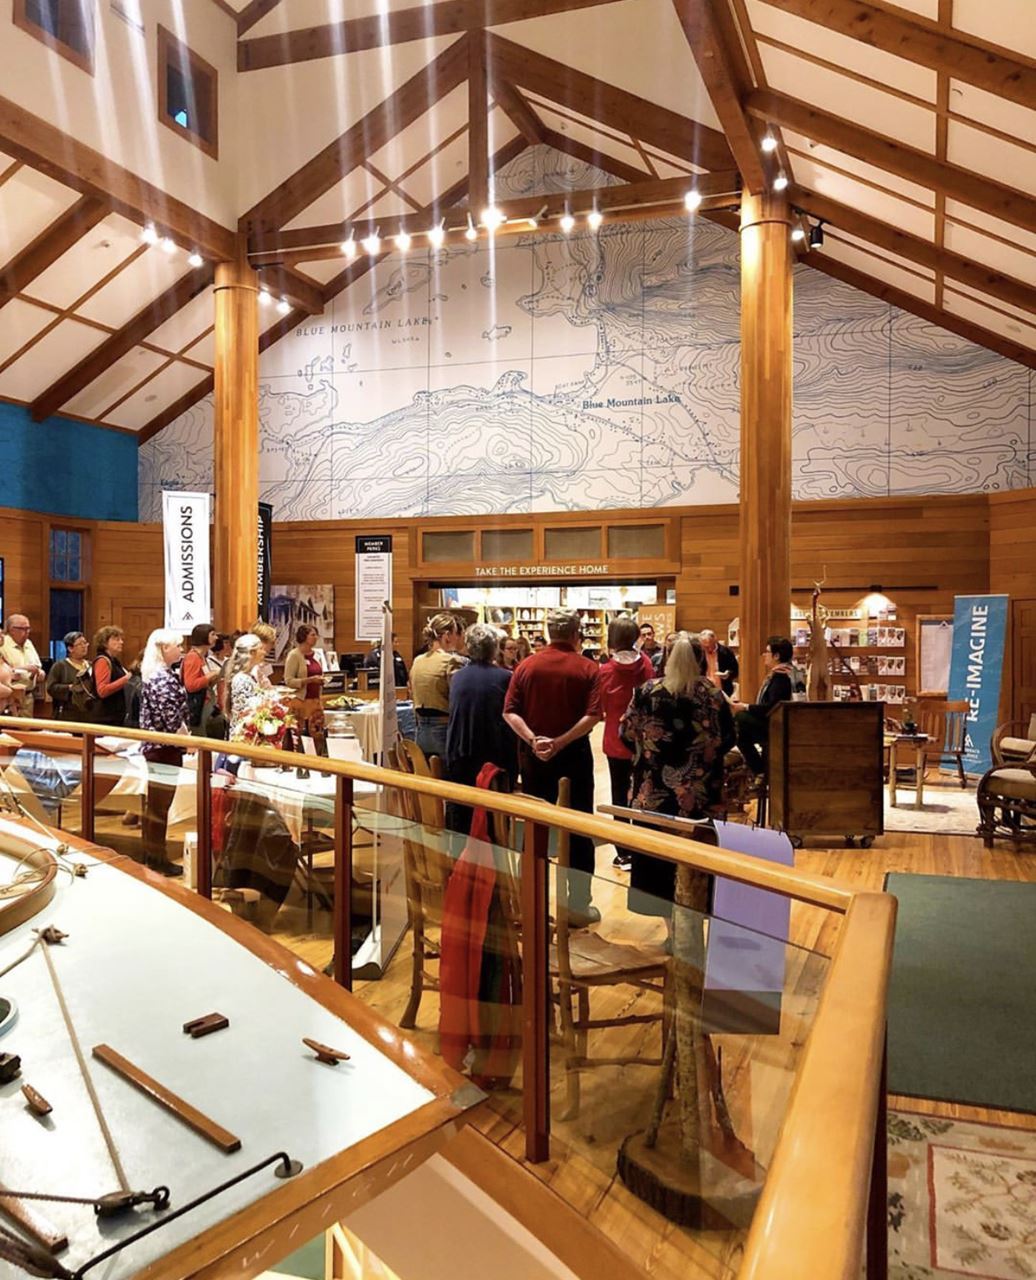 A little taxidermy, behind the scenes collections storage, and more! Thank you for a great North Country Meet-Up at the Adirondack Experience.